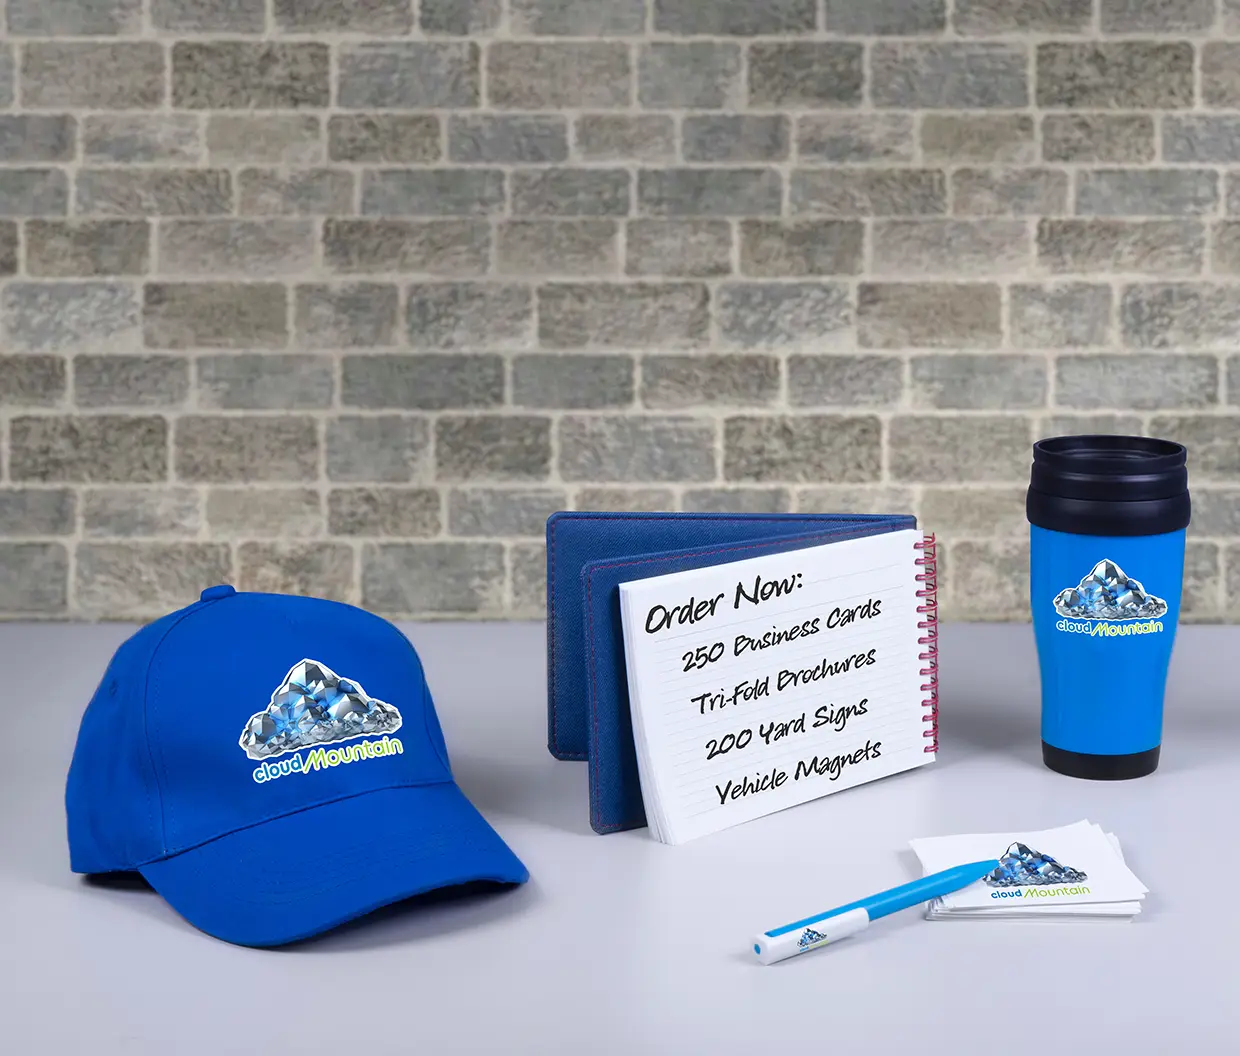 Business Products - Baseball cap, Pen, Business Cards, Coffee Mug, Notepad